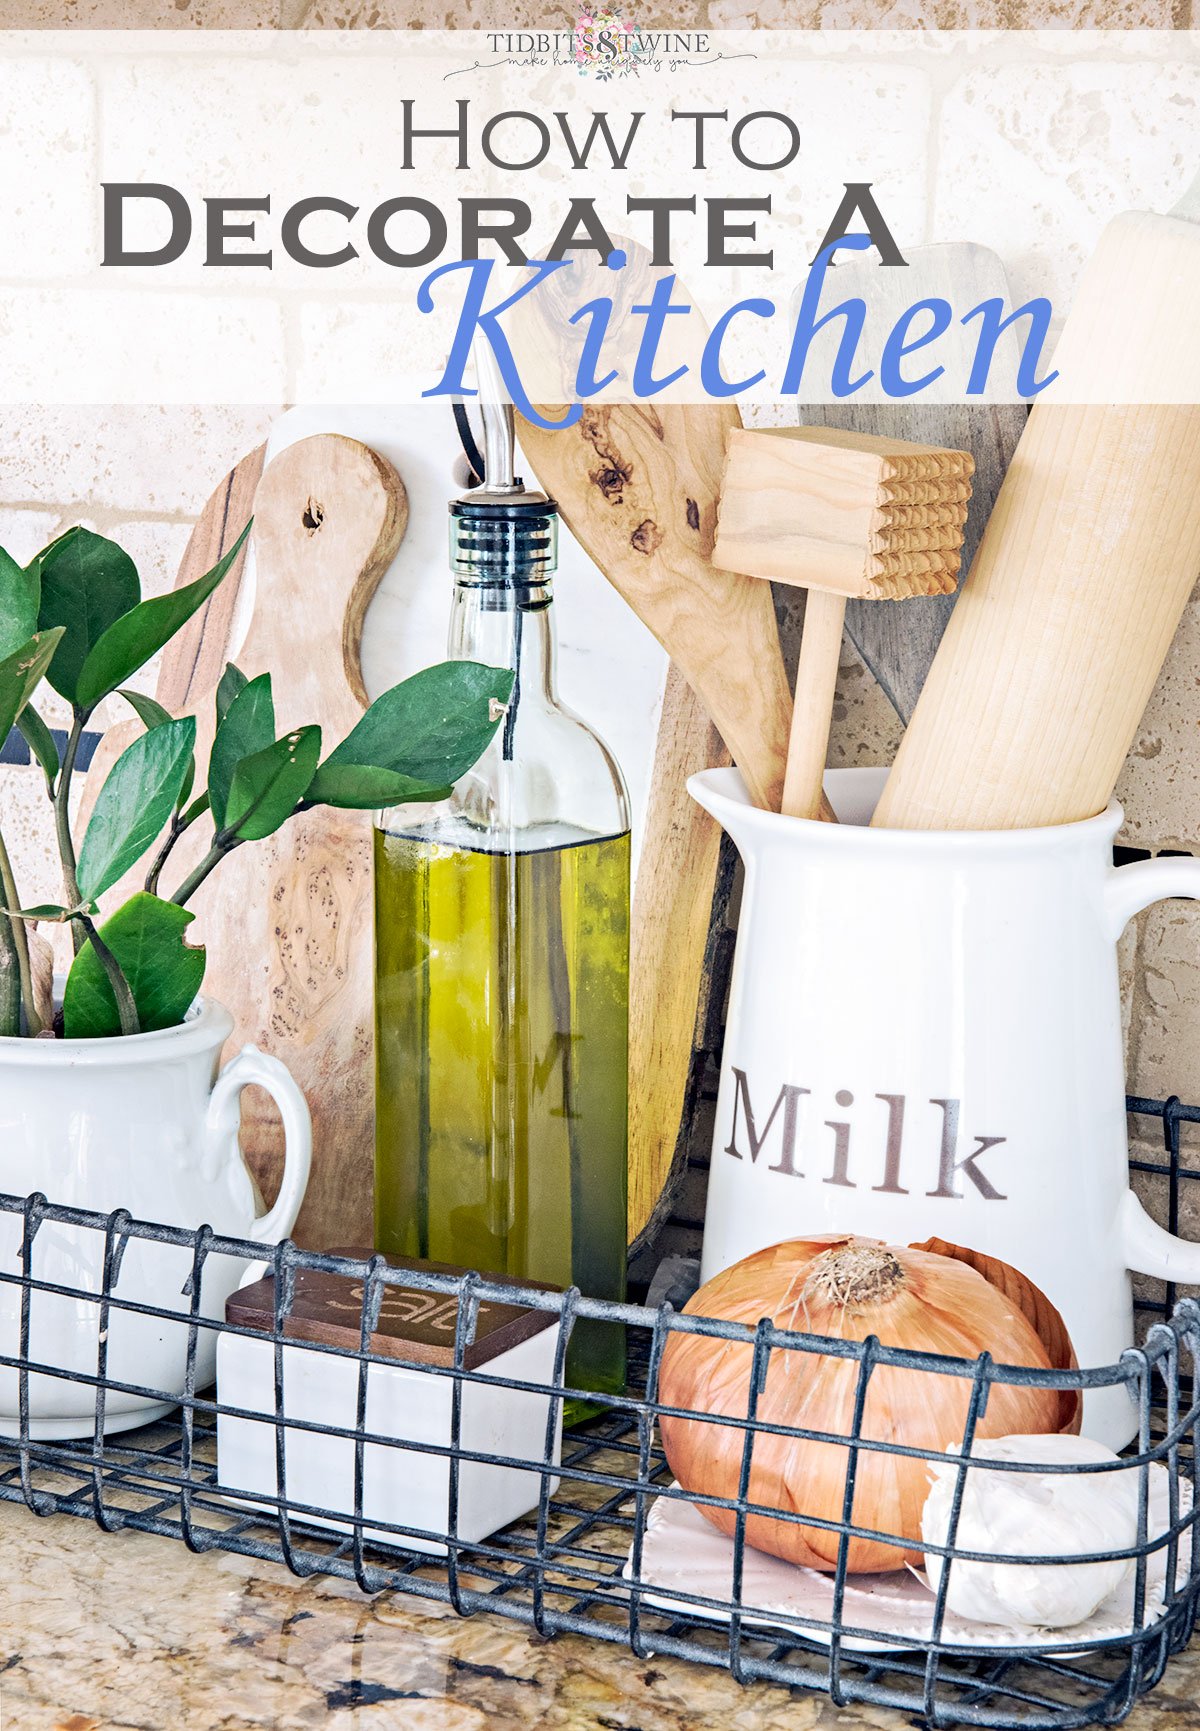 How to Decorate a Kitchen – Stylish & Practical Ways to Accessorize Your Space